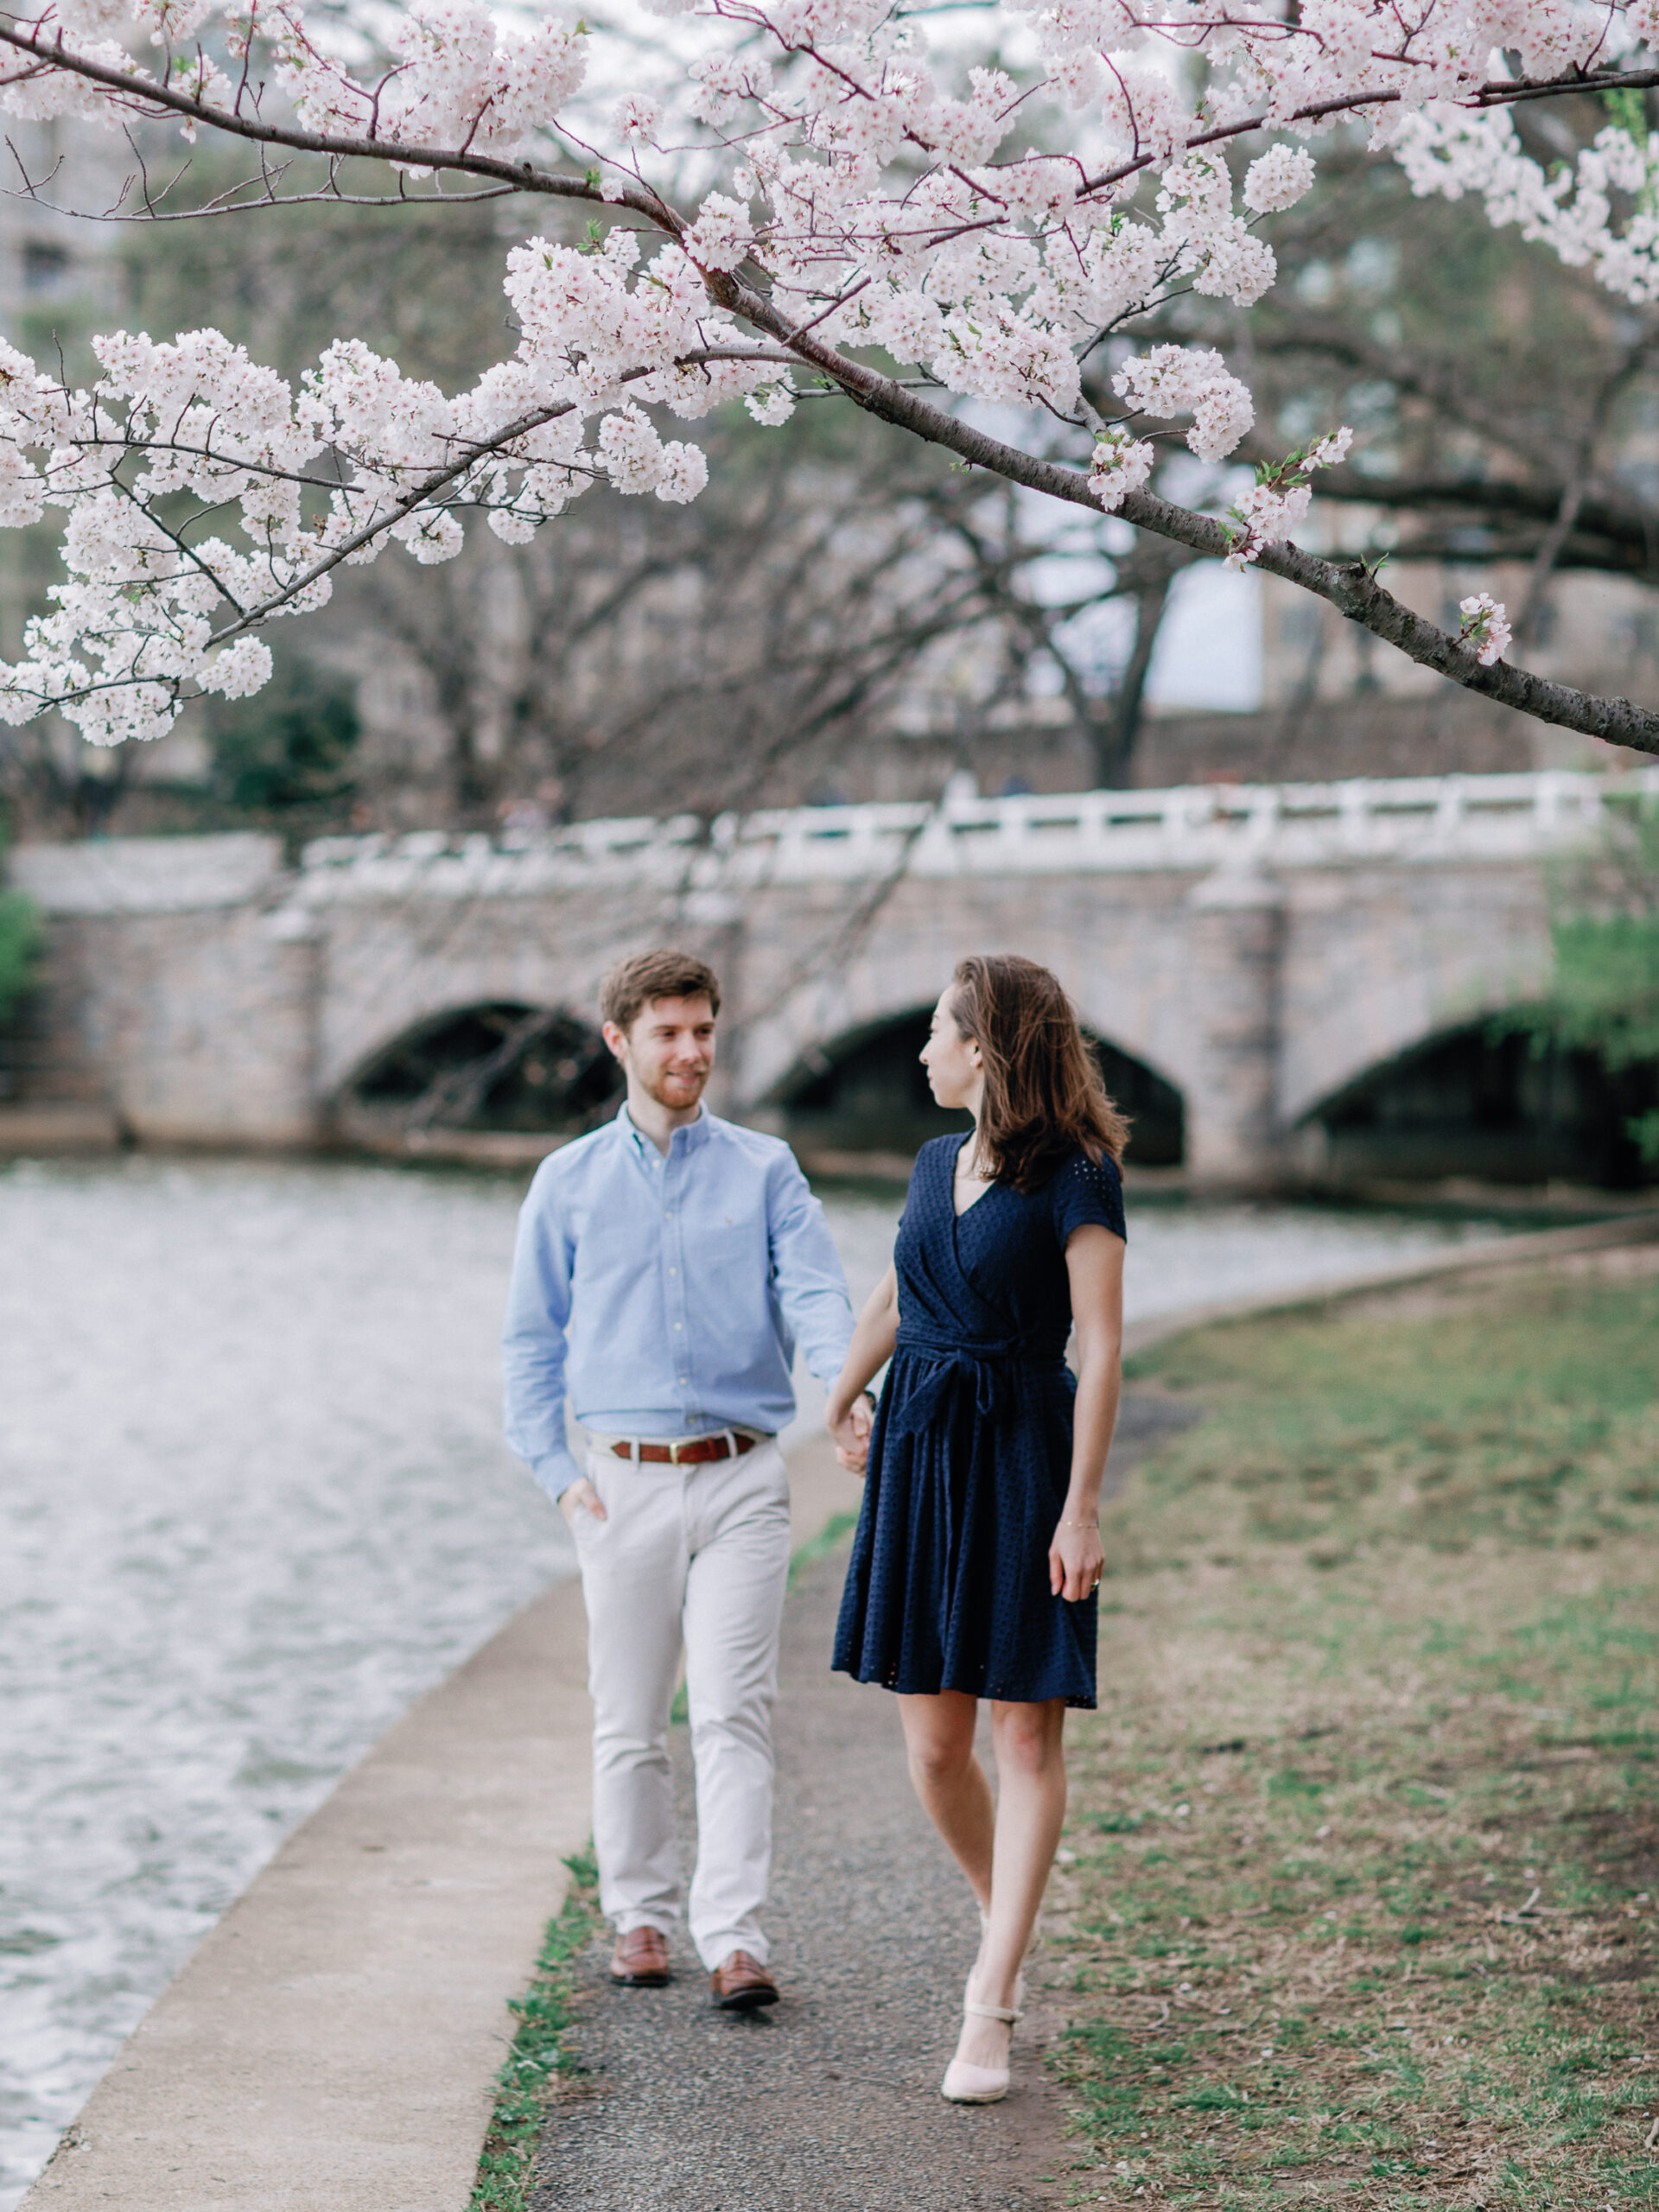 A newly engaged couple walking underneath the cherry blossom trees in washington dc.